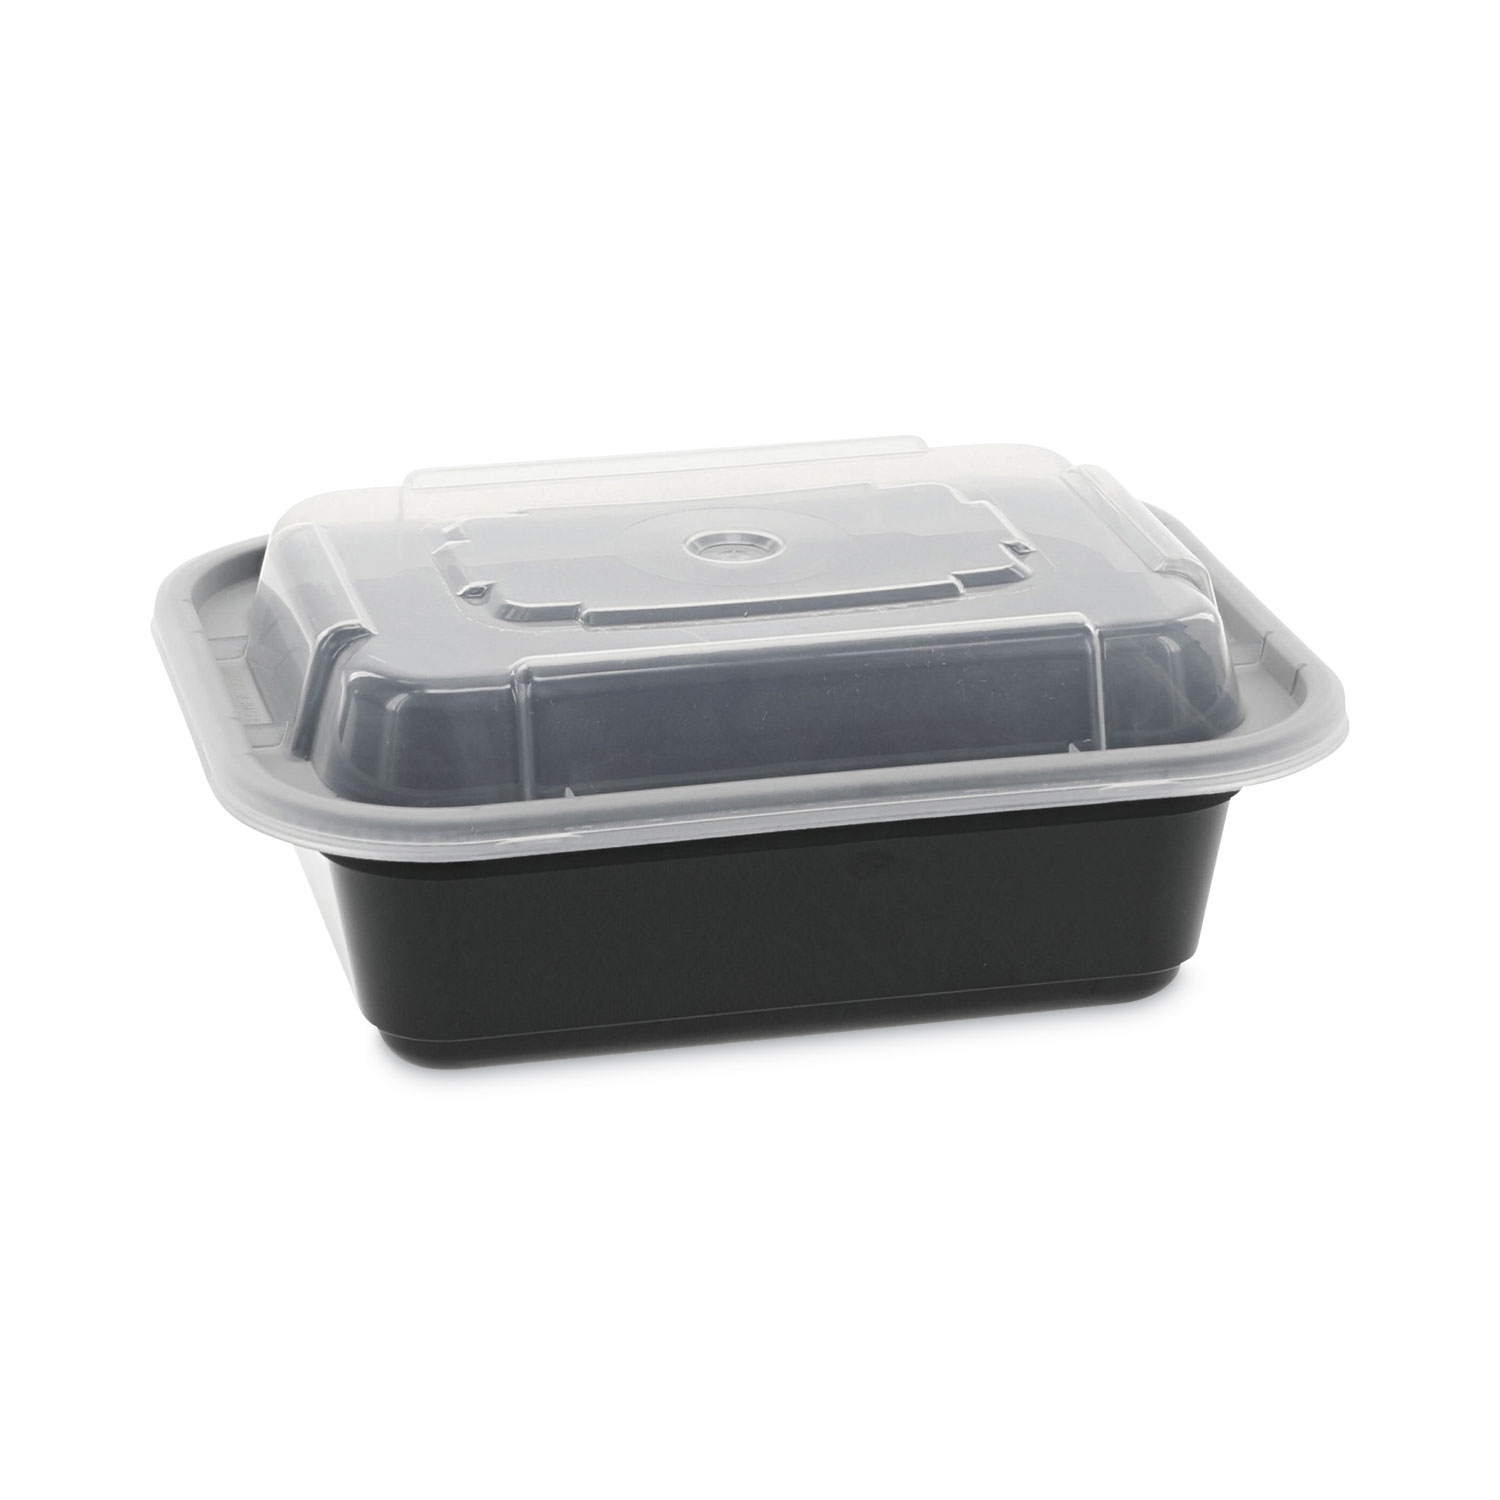 Newspring VERSAtainer Microwavable Containers, Rectangular, 12 oz, 4.5 x 5.5 x 2.12, White/Clear, Plastic, 150/Carton